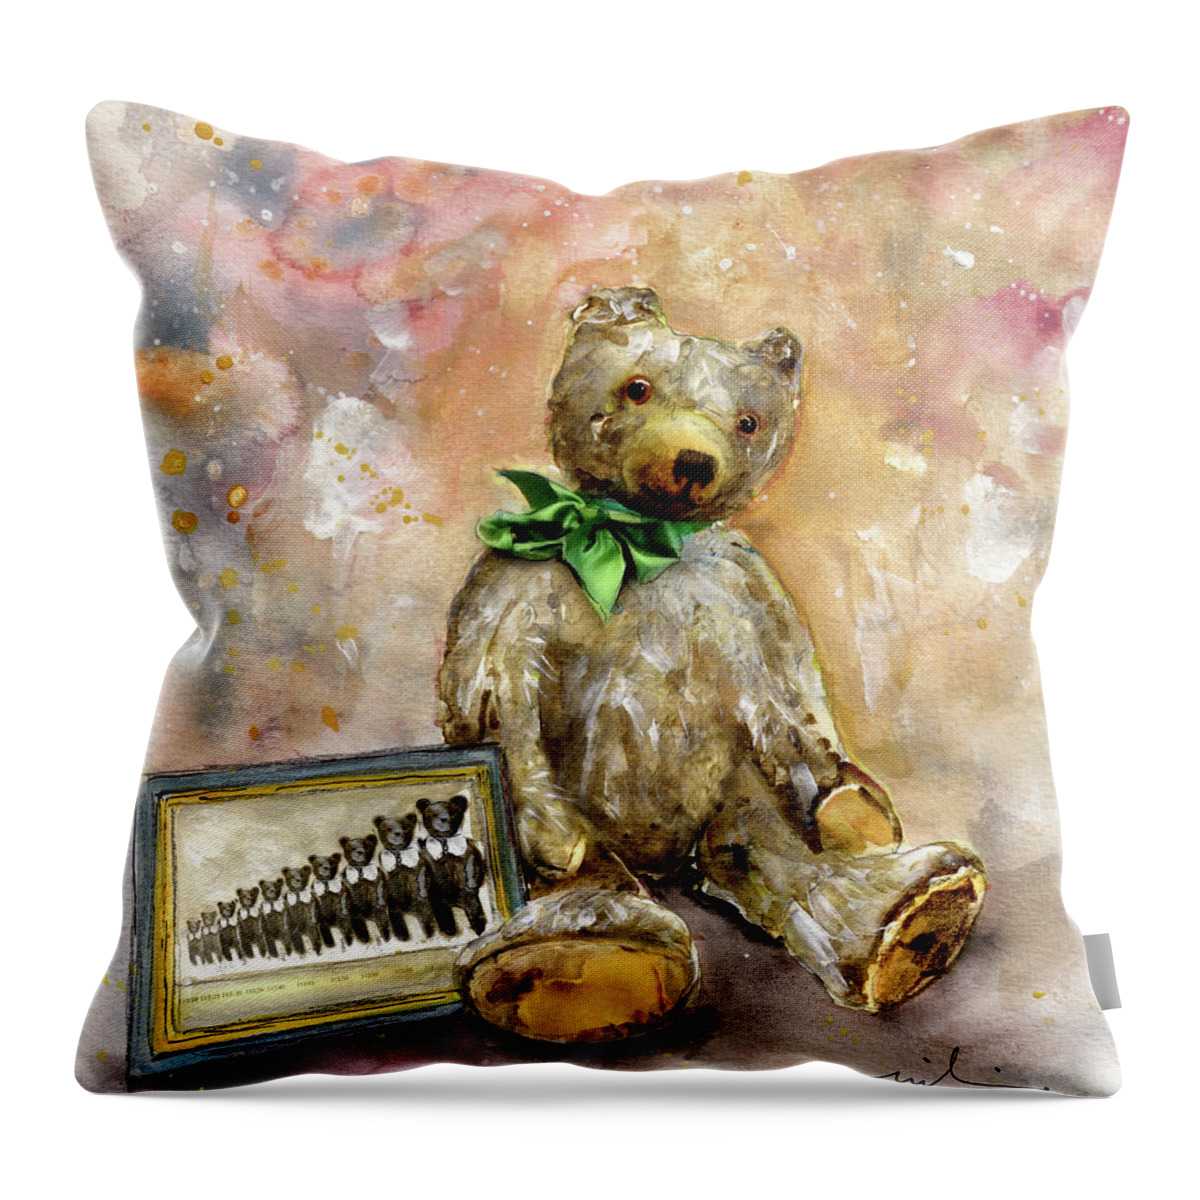 Travel Throw Pillow featuring the painting Teddy bear Growler At Newby Hall by Miki De Goodaboom